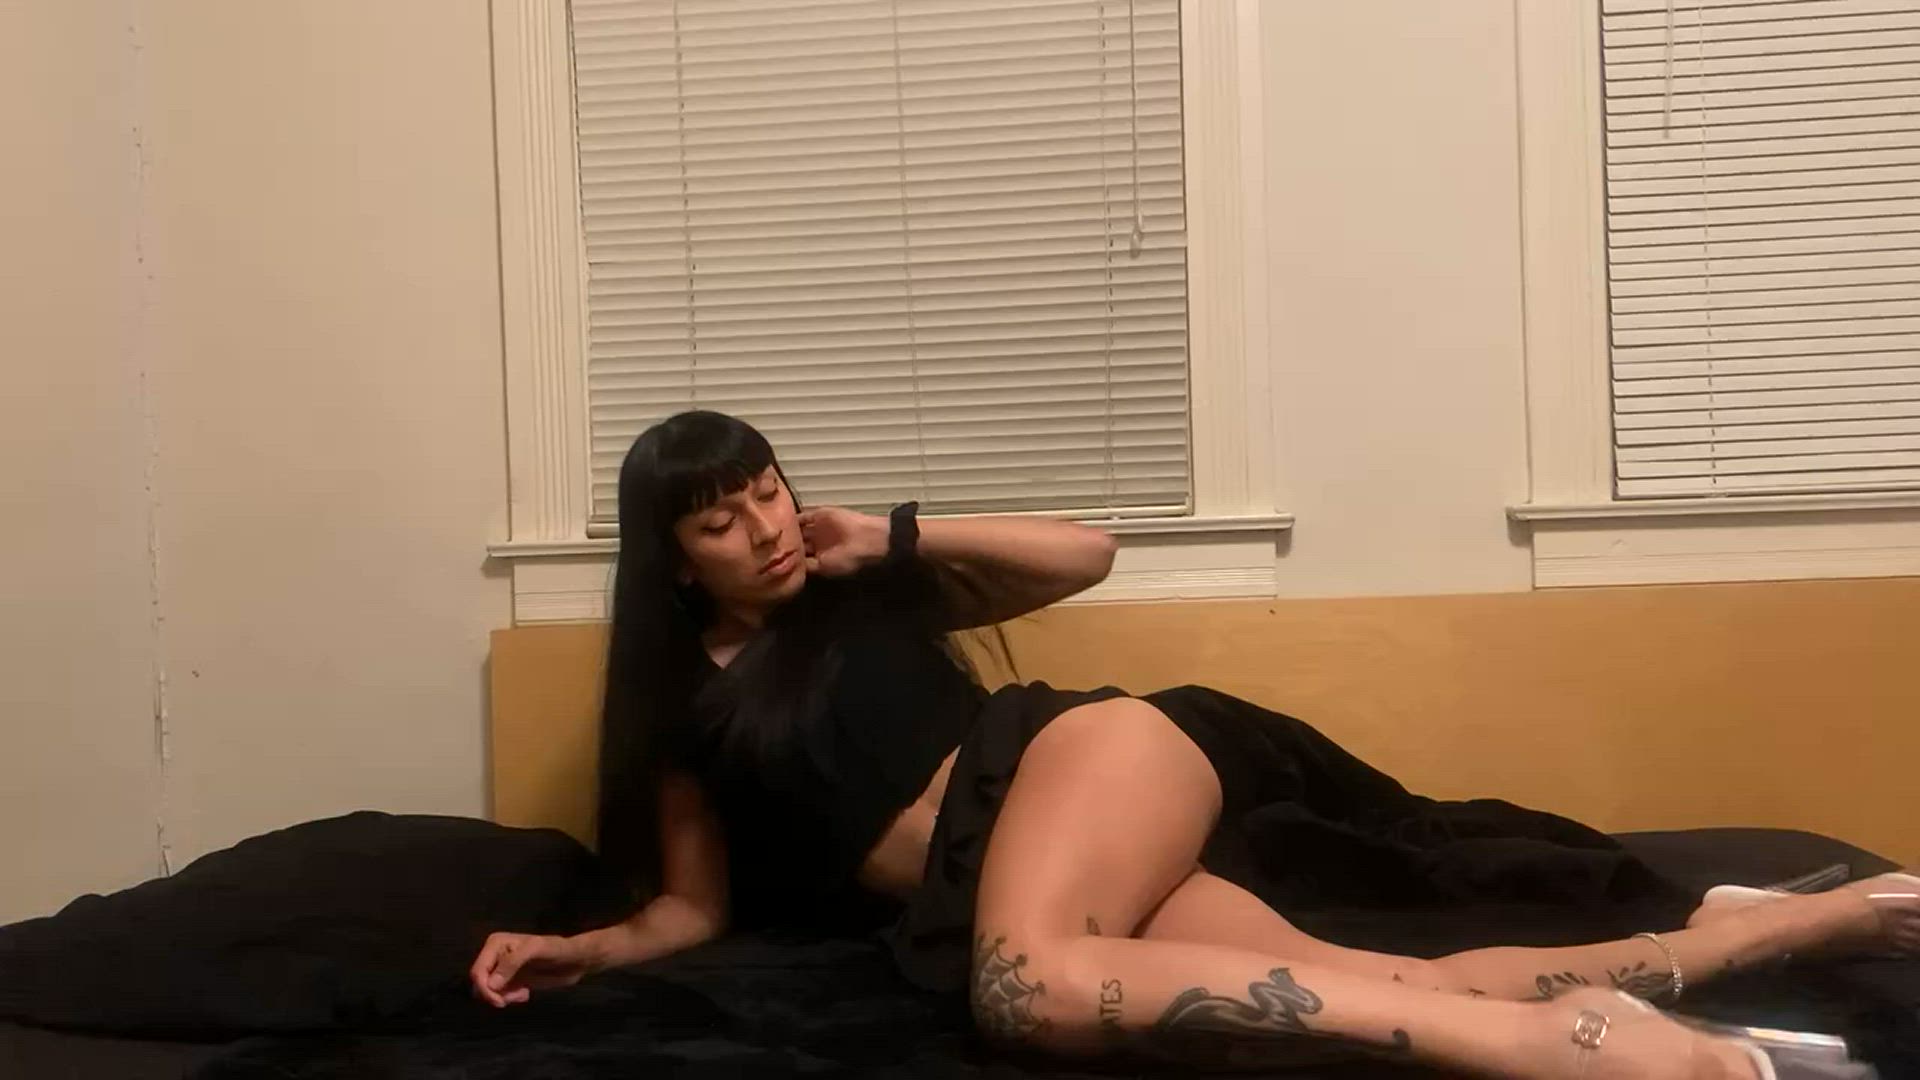 Amateur porn video with onlyfans model Ari <strong>@ariaaaxxx</strong>